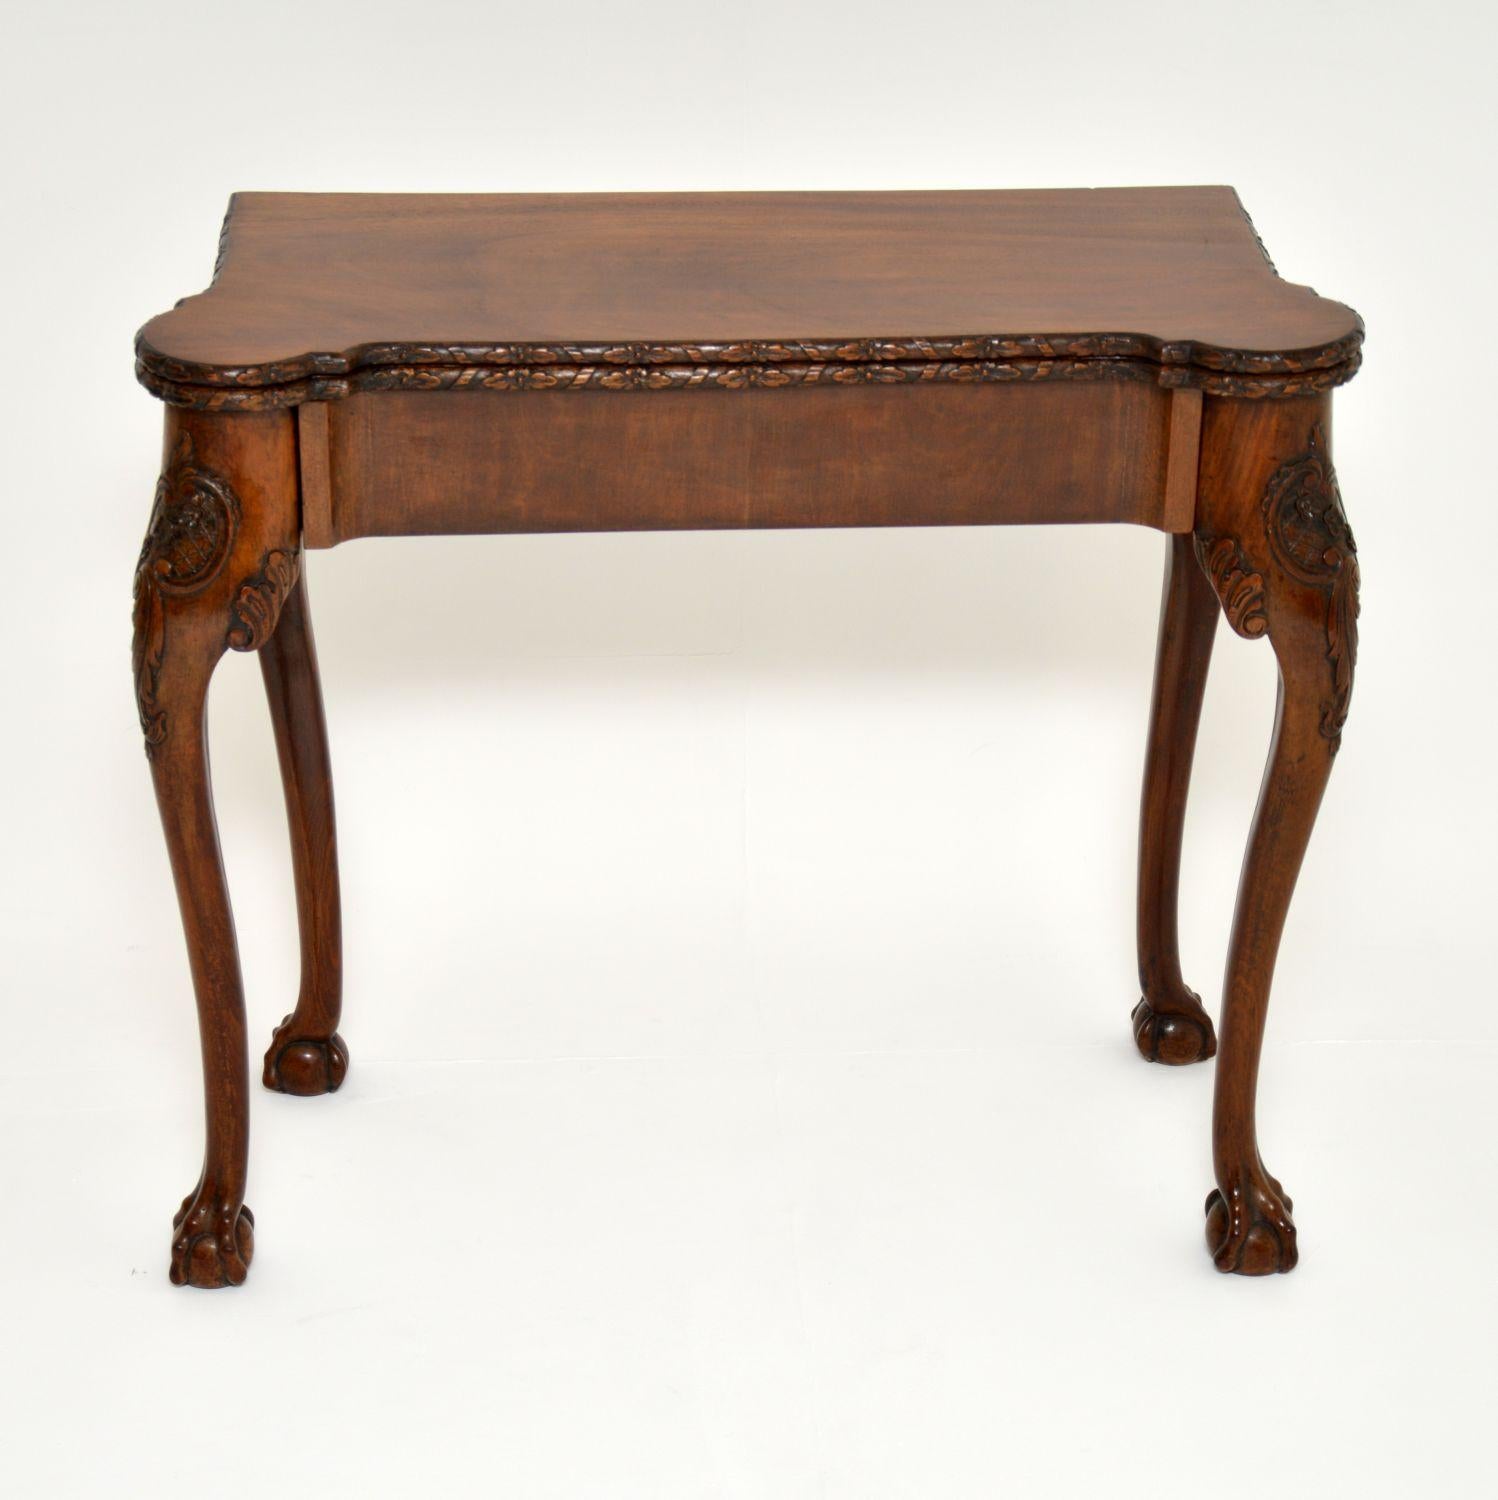 Antique carved walnut card table full of character and in good original condition. At first glance, this card table looks like an original 1750s period item, but we think it dates from the 1890s period. Either way, it’s a great looking piece of